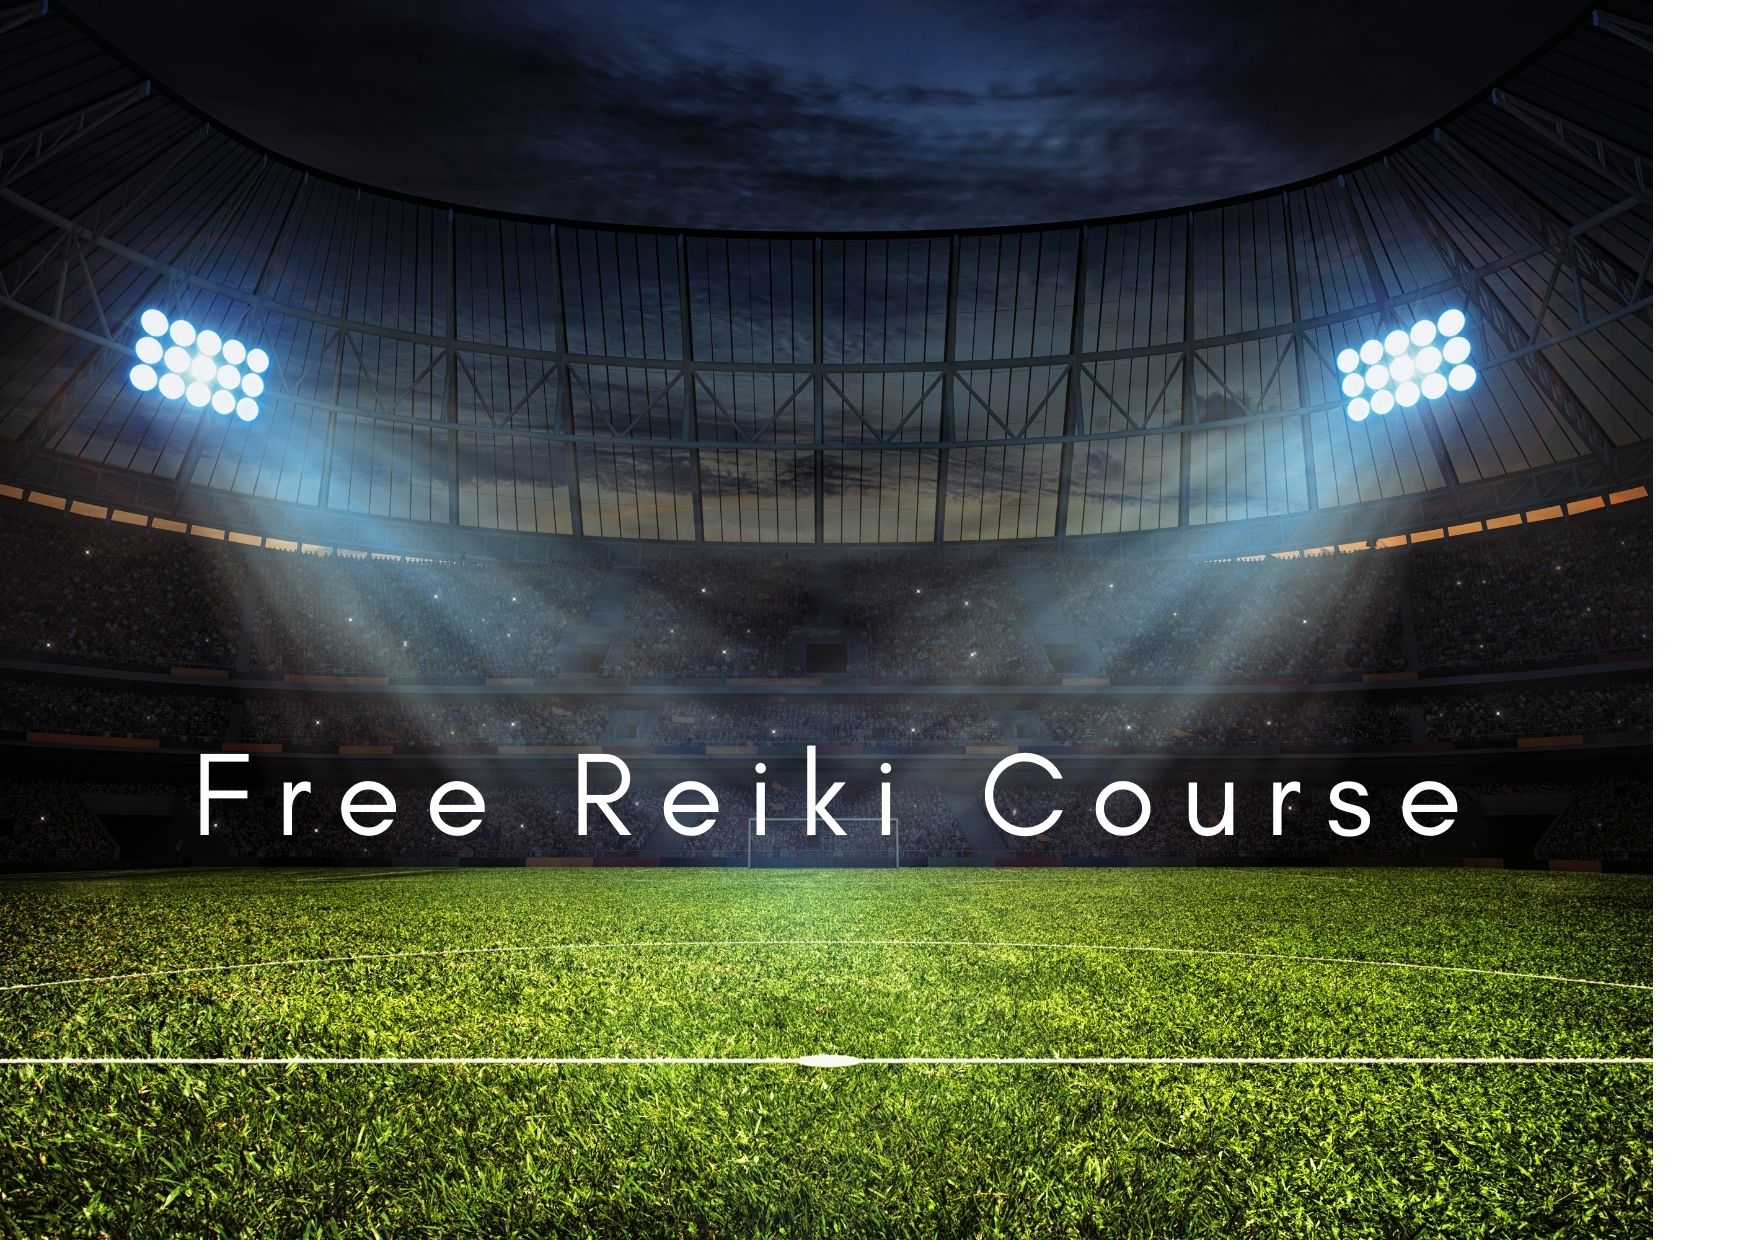 Free Reiki Course - Make Your Body And Mind Energetic & Healthy